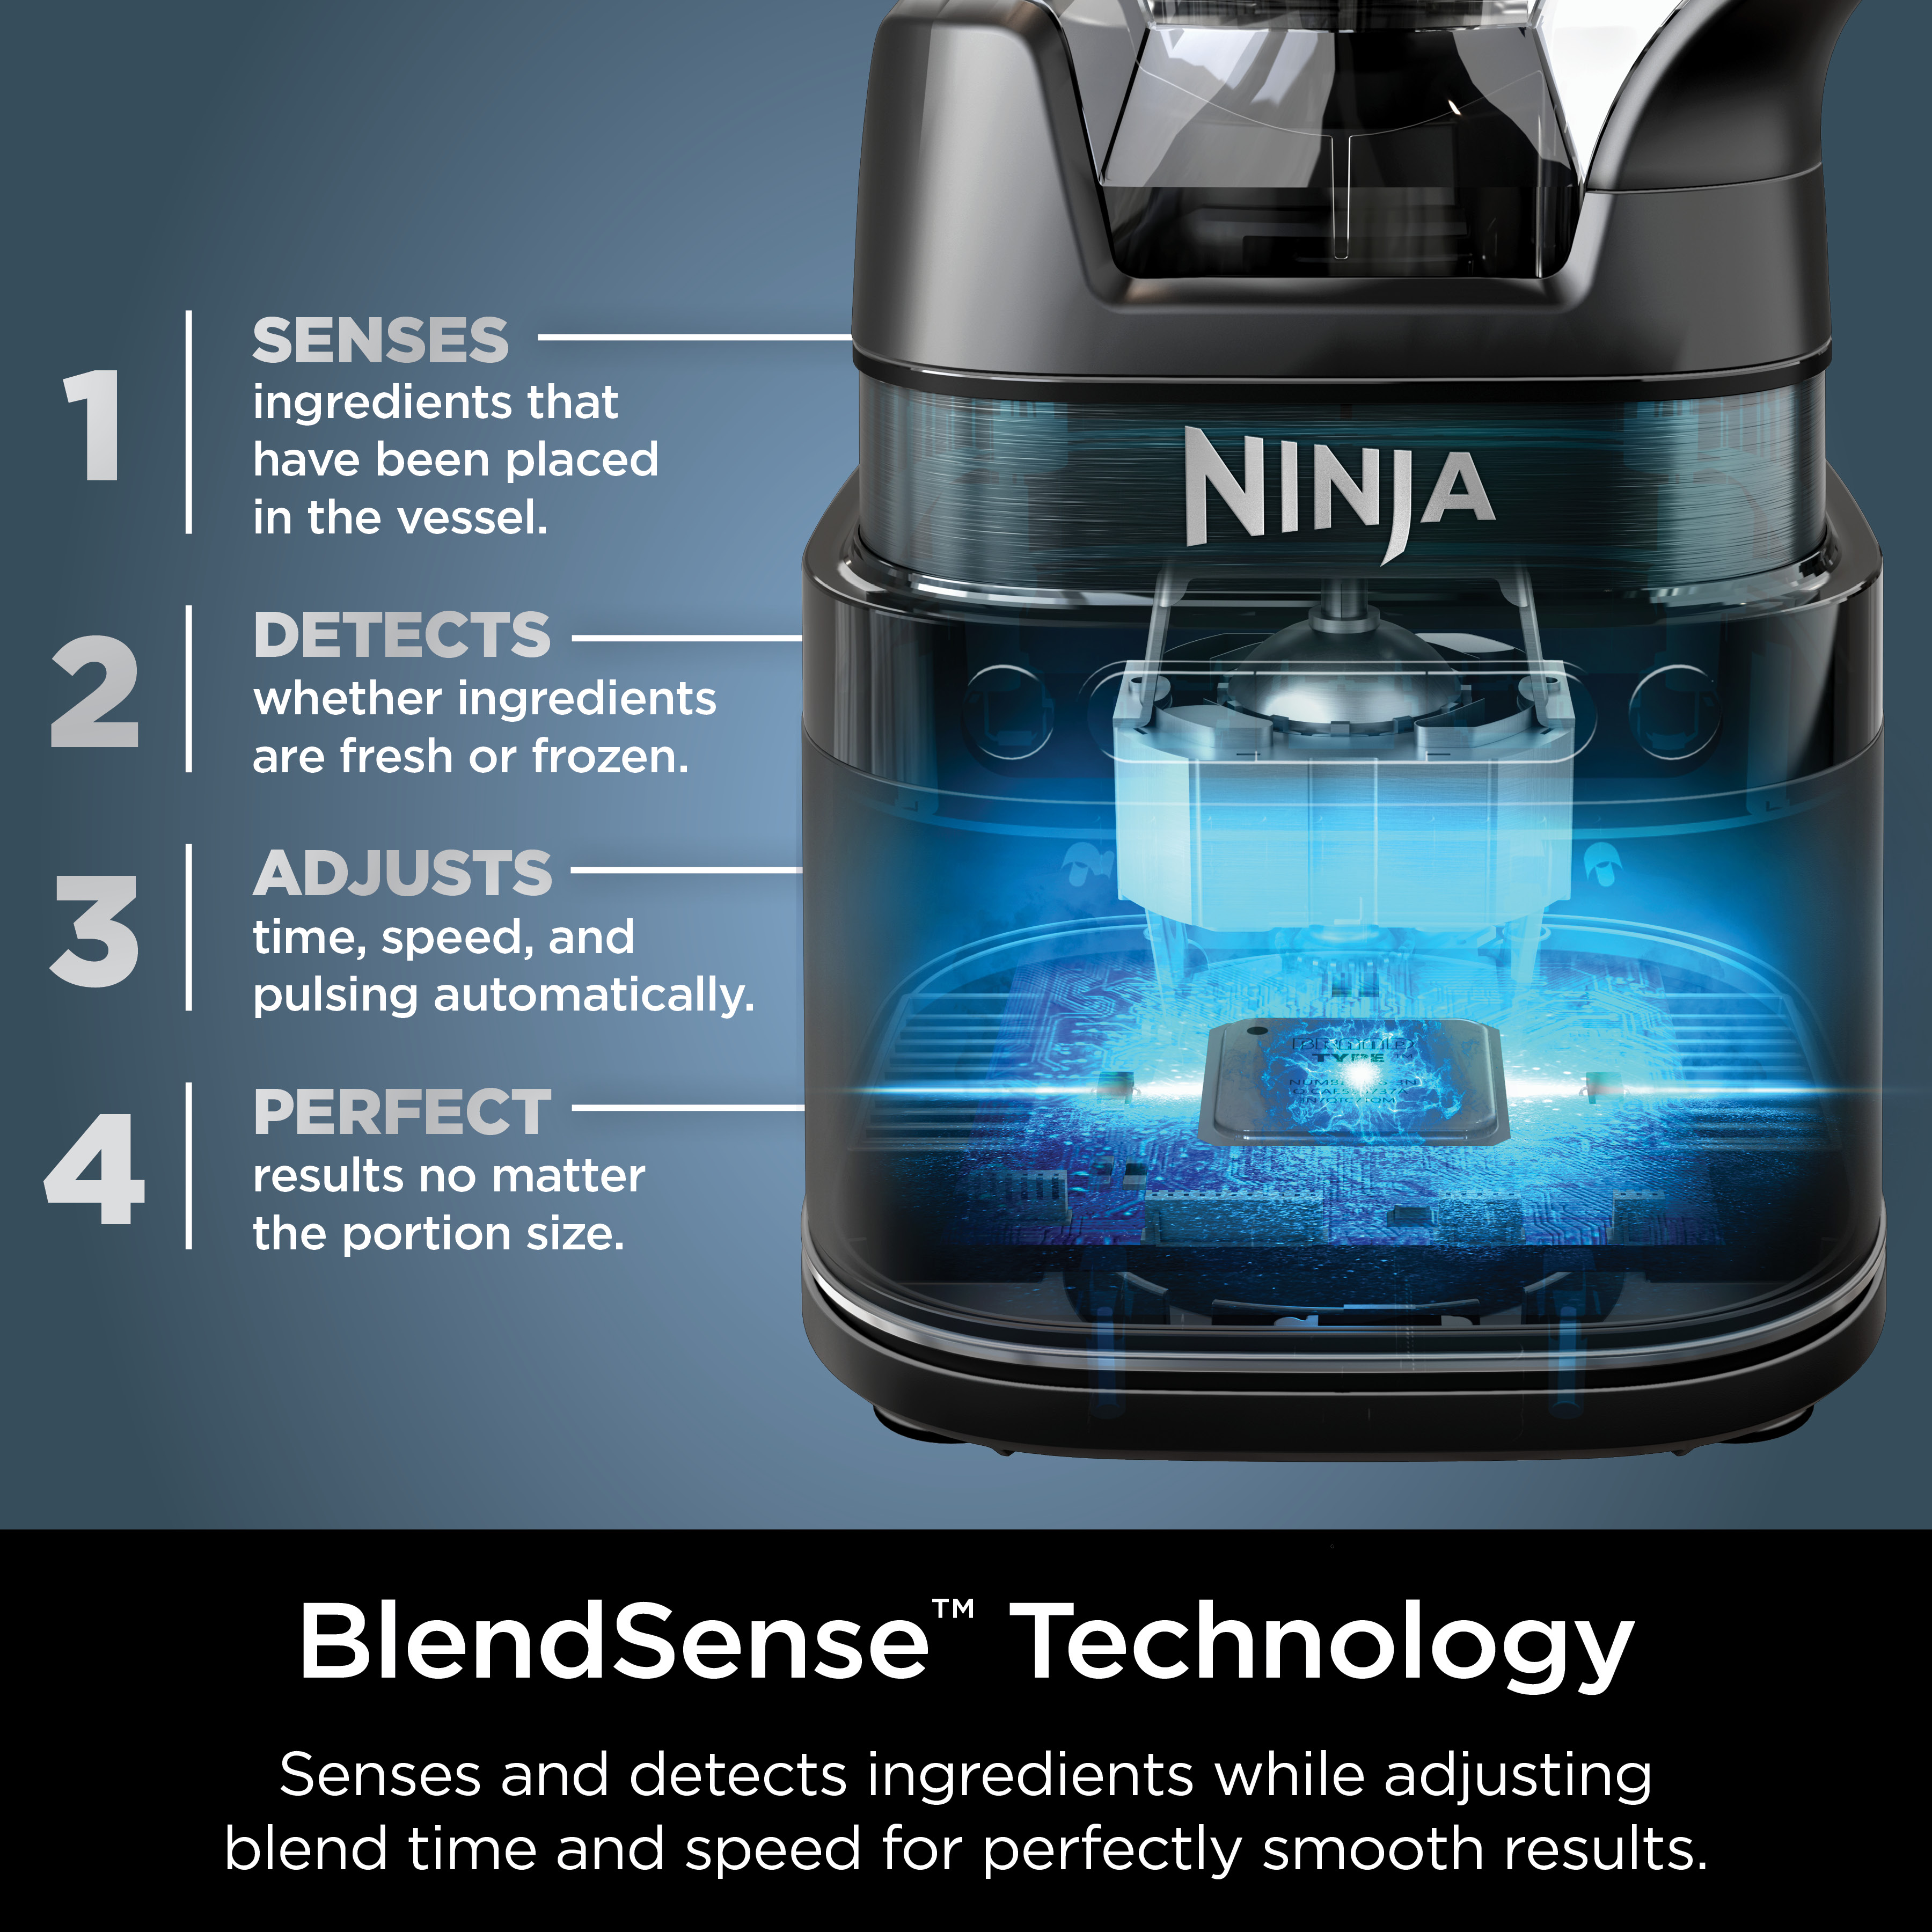 Ninja® Professional Plus Blender with Auto-iQ® and 72-oz.* Total Crushing  Pitcher & Lid, BN700 Blenders Electric Blender